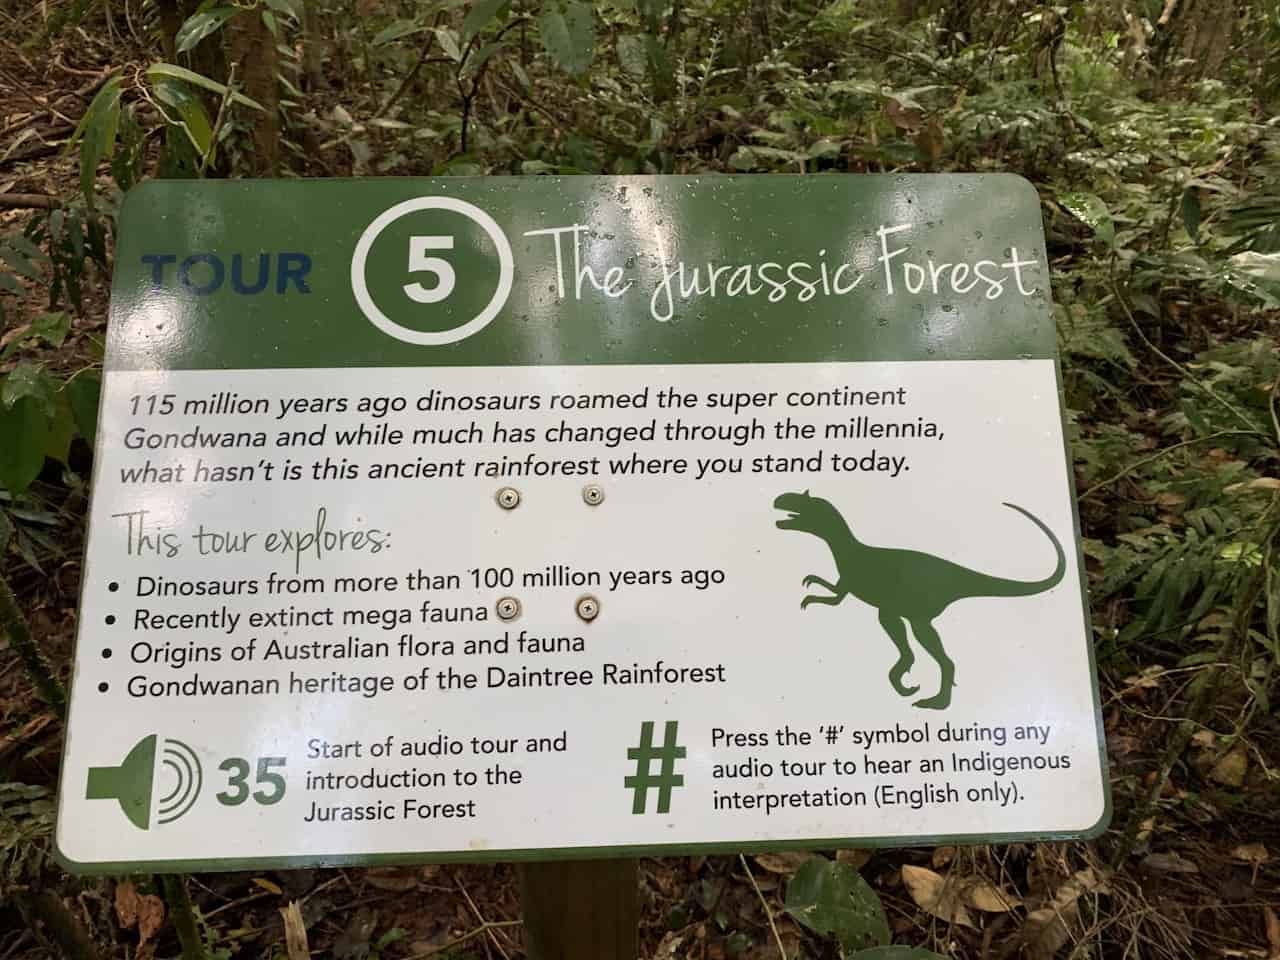 The Jurassic Forest